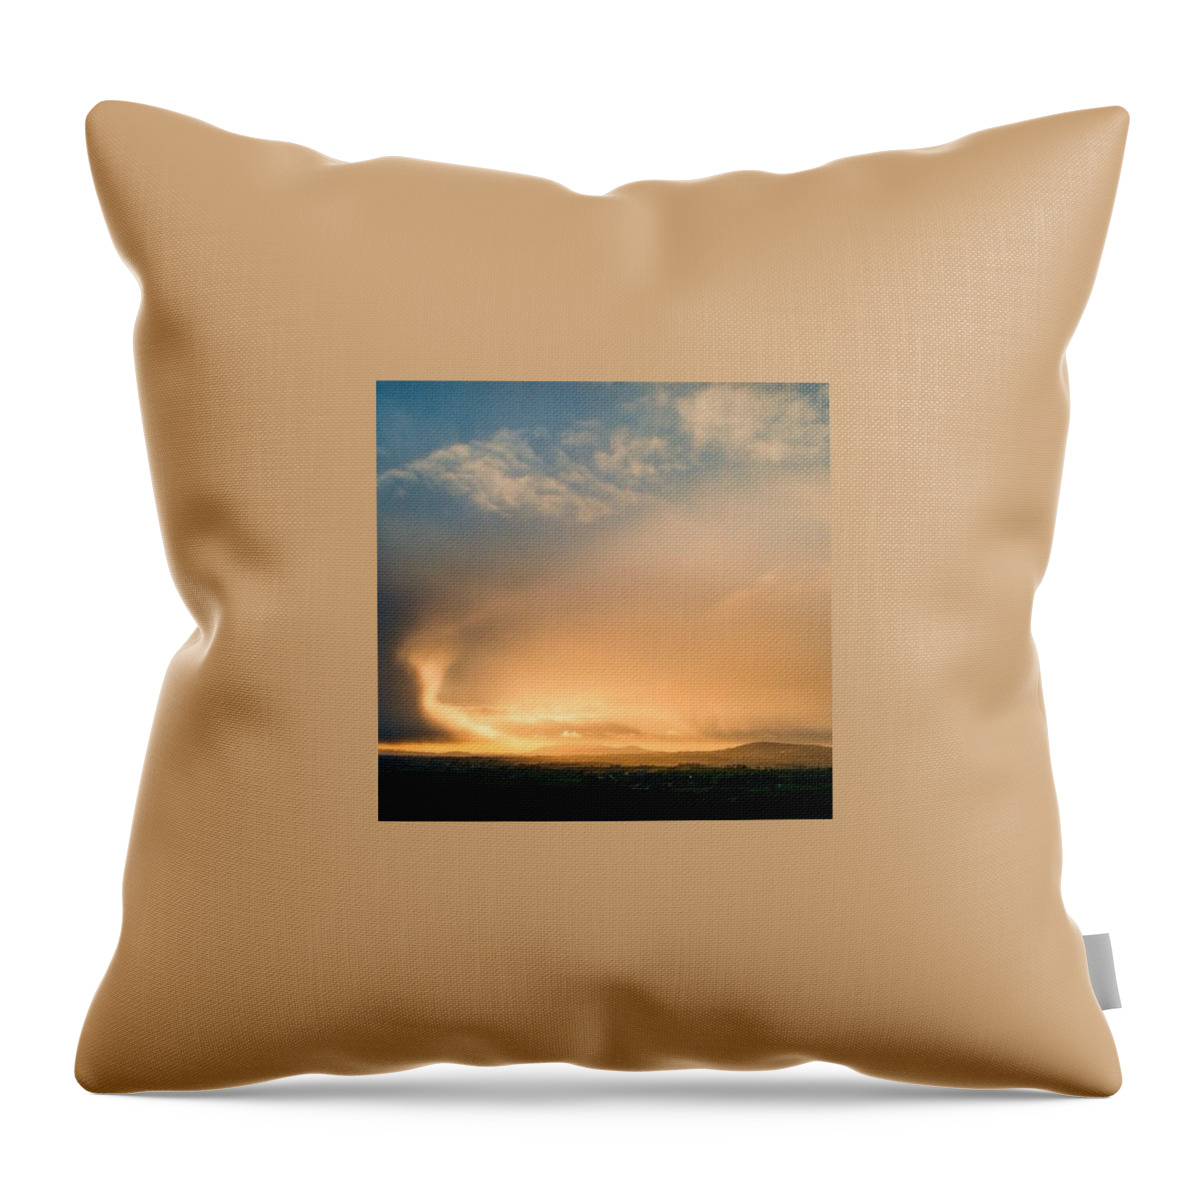 Beautiful Throw Pillow featuring the photograph The Glow by Aleck Cartwright